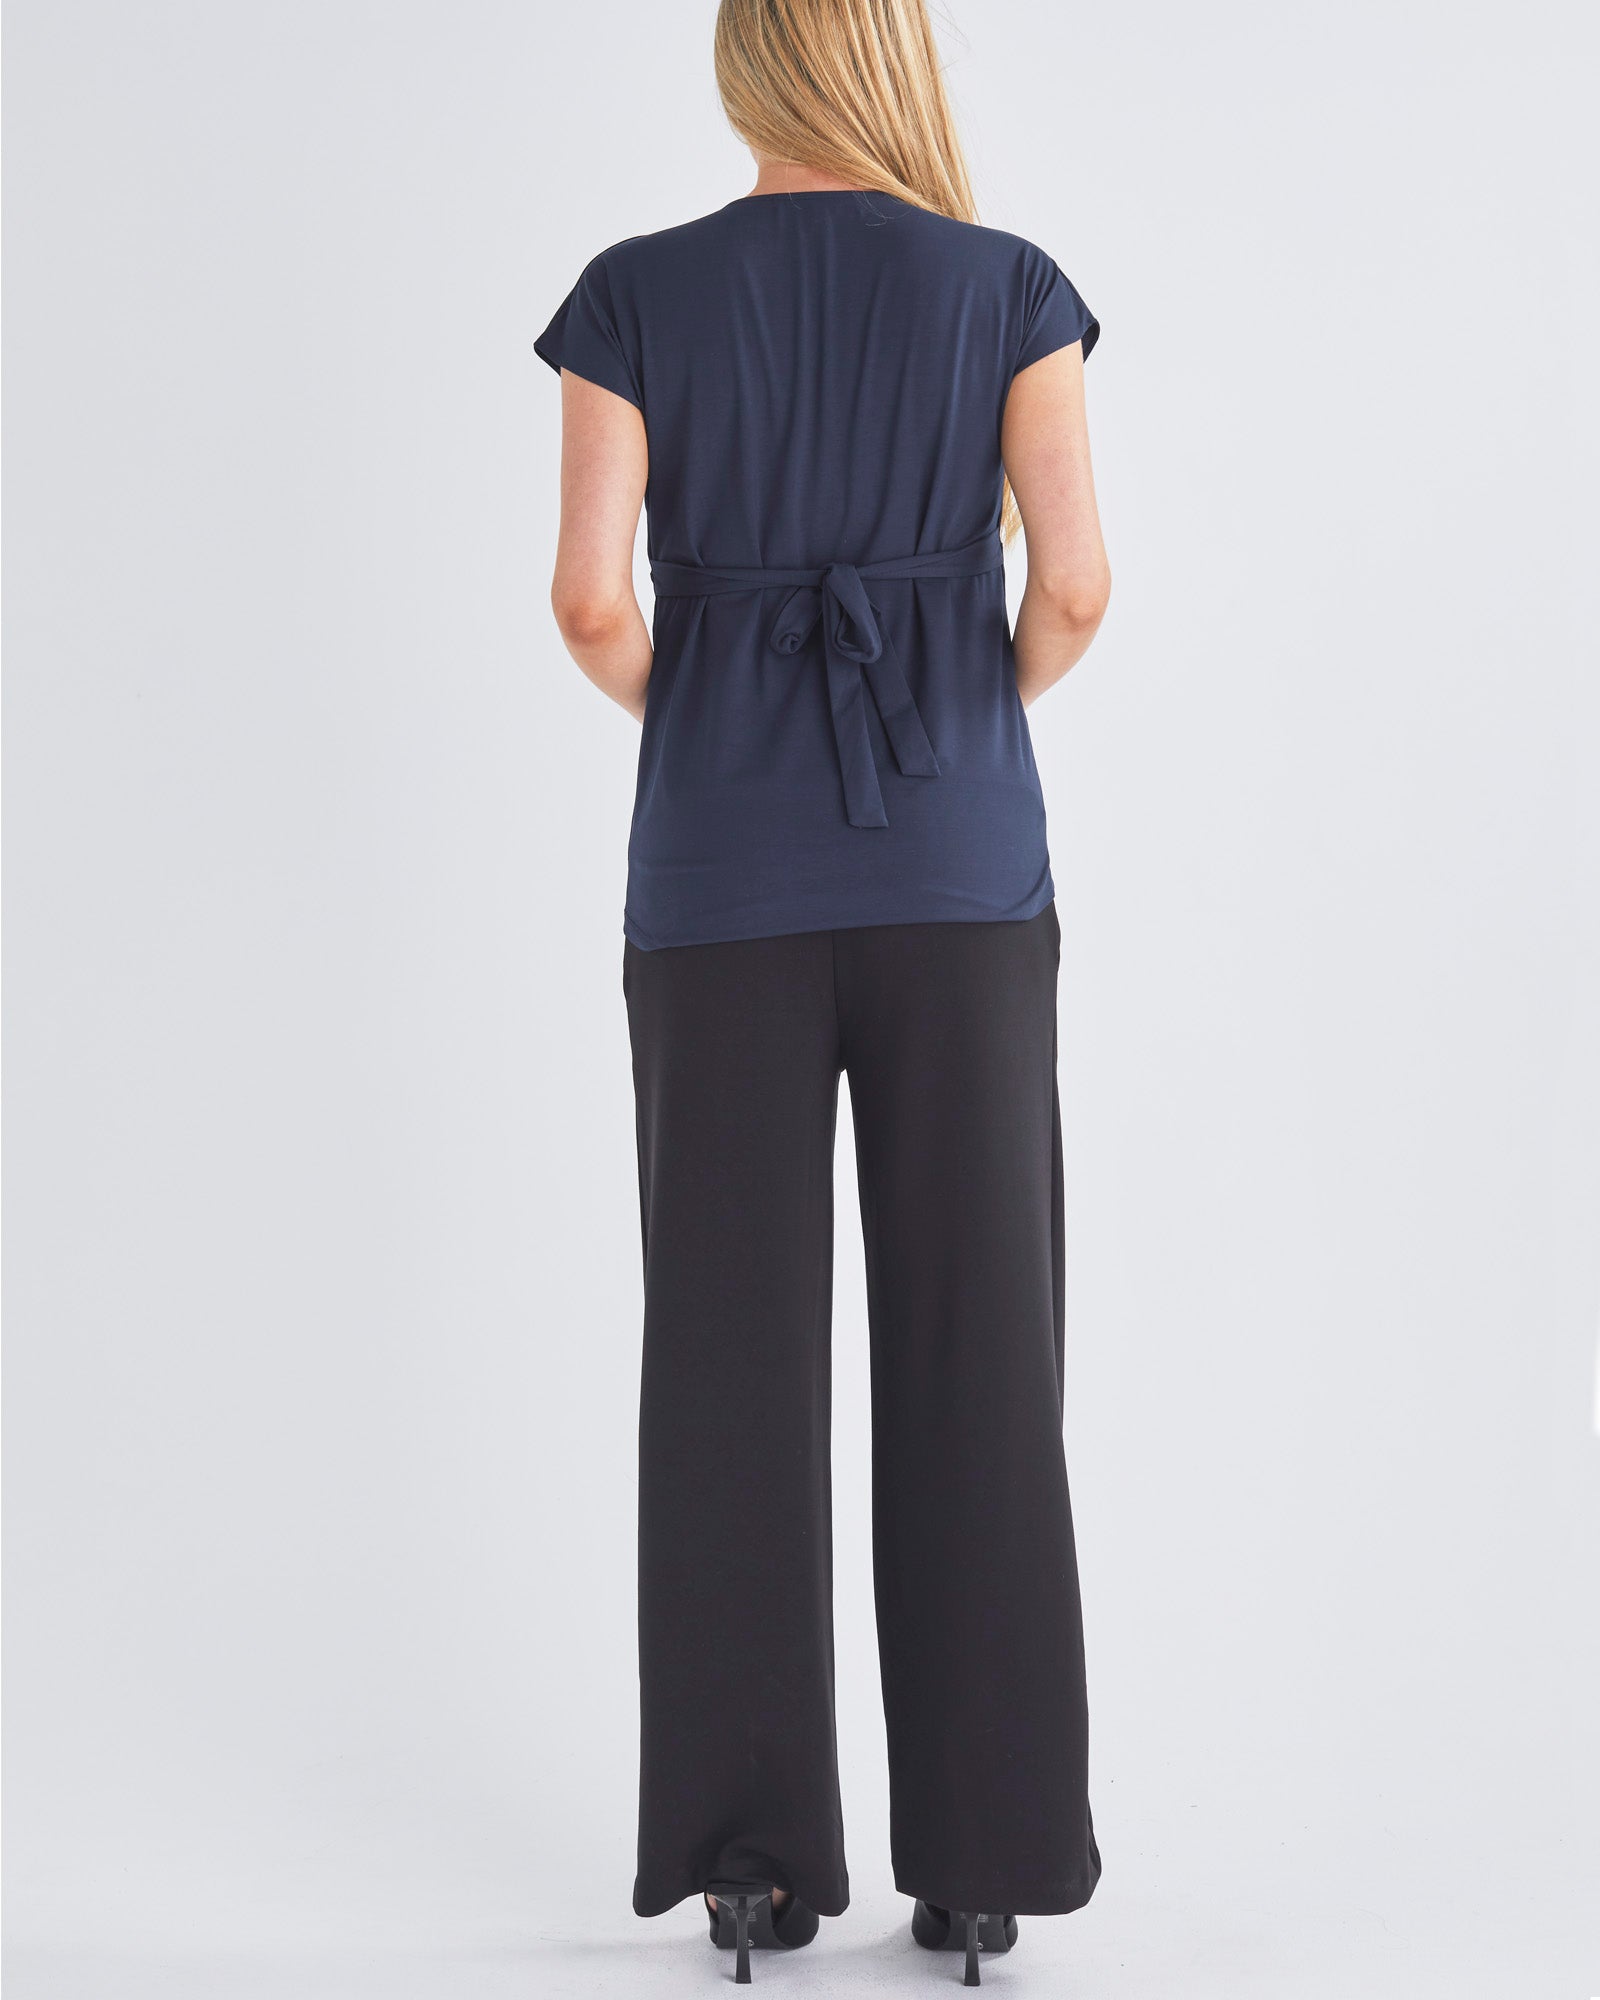 Back View - A Pregnant Woment Wearing Elodie Wide Leg Maternity Black Work Pant in Ponti from Angel Maternity Australia